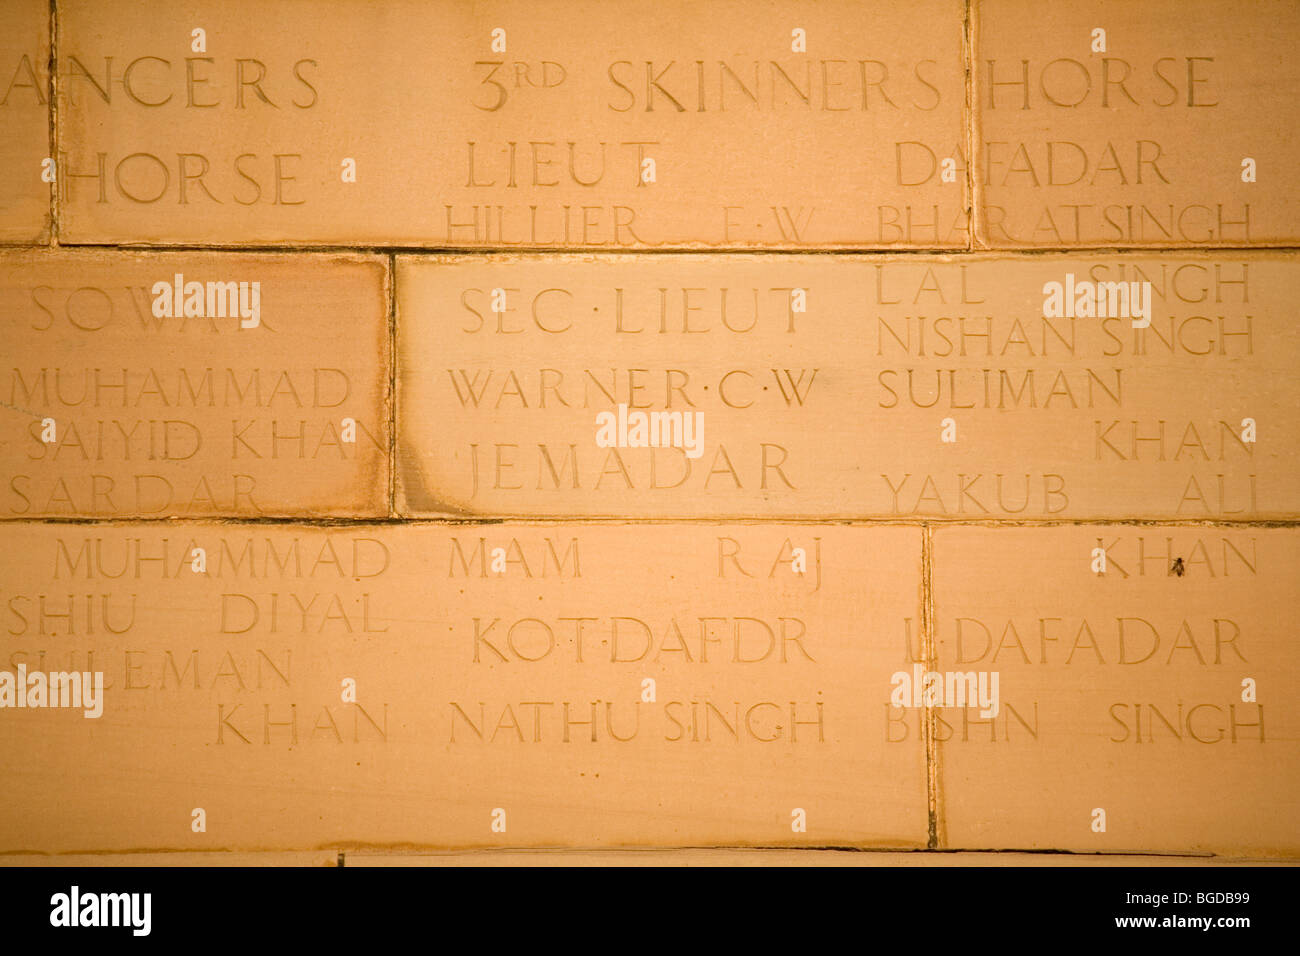 Names of casualties from World War One are inscribed on India Gate in New Delhi, India. Stock Photo